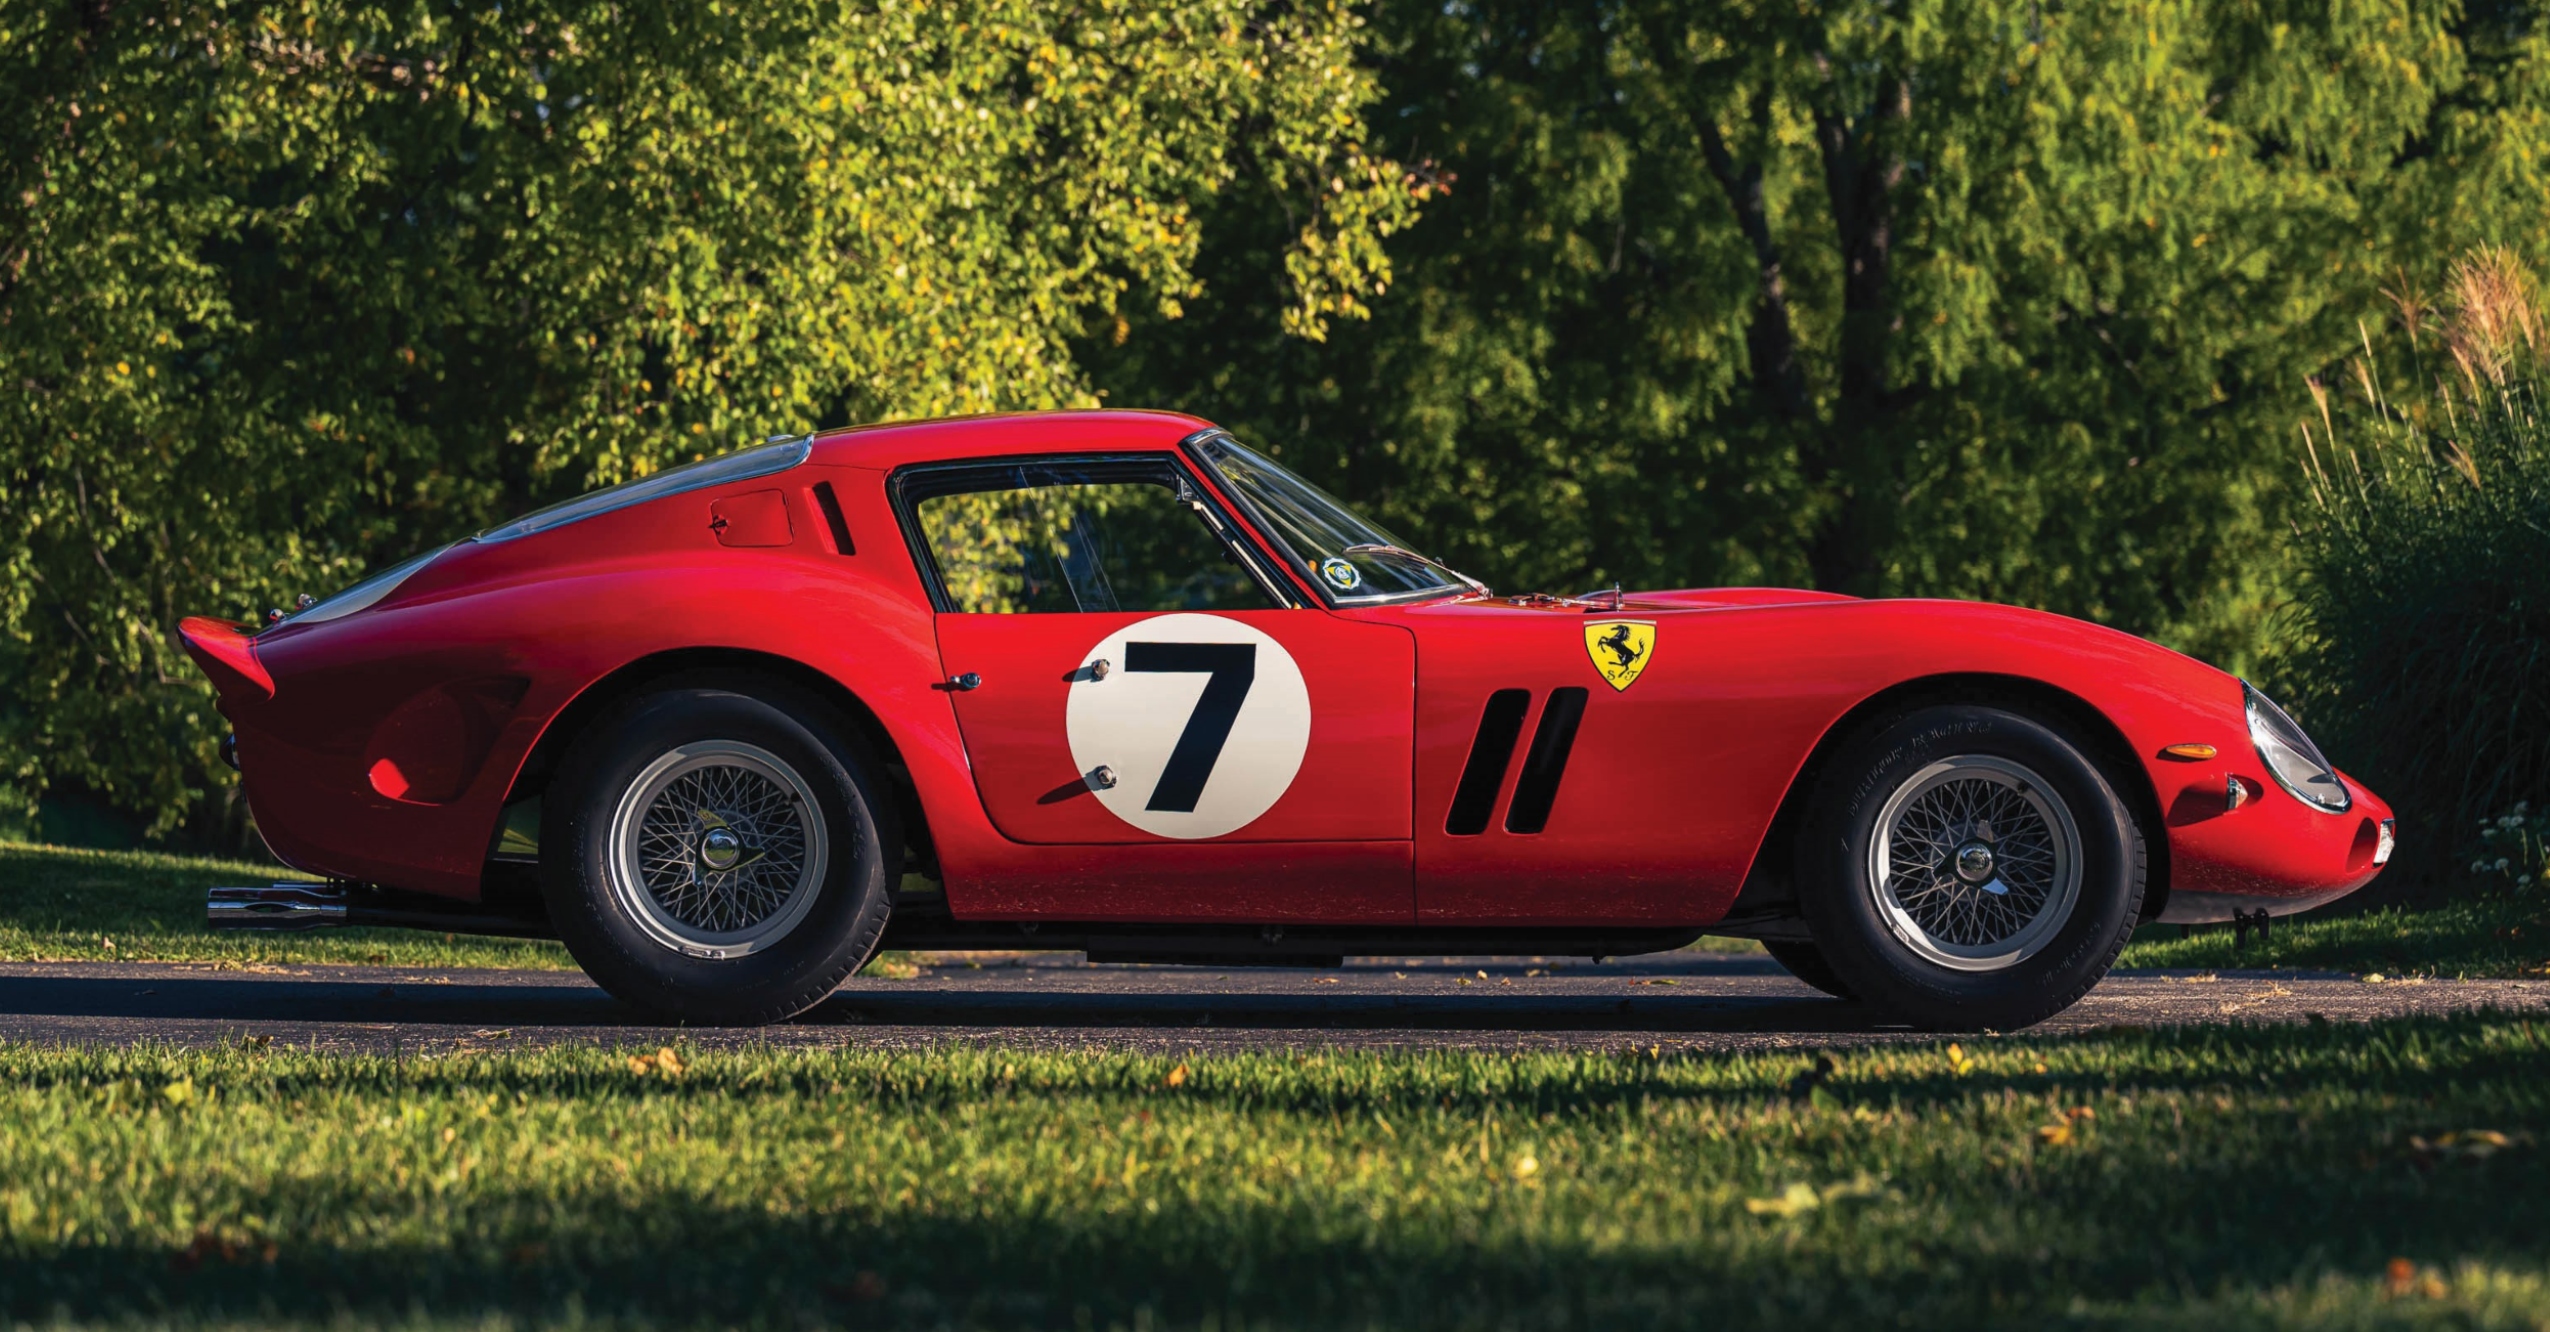 How The Ferrari 250 GTO Became The World’s Most Valuable Production Car